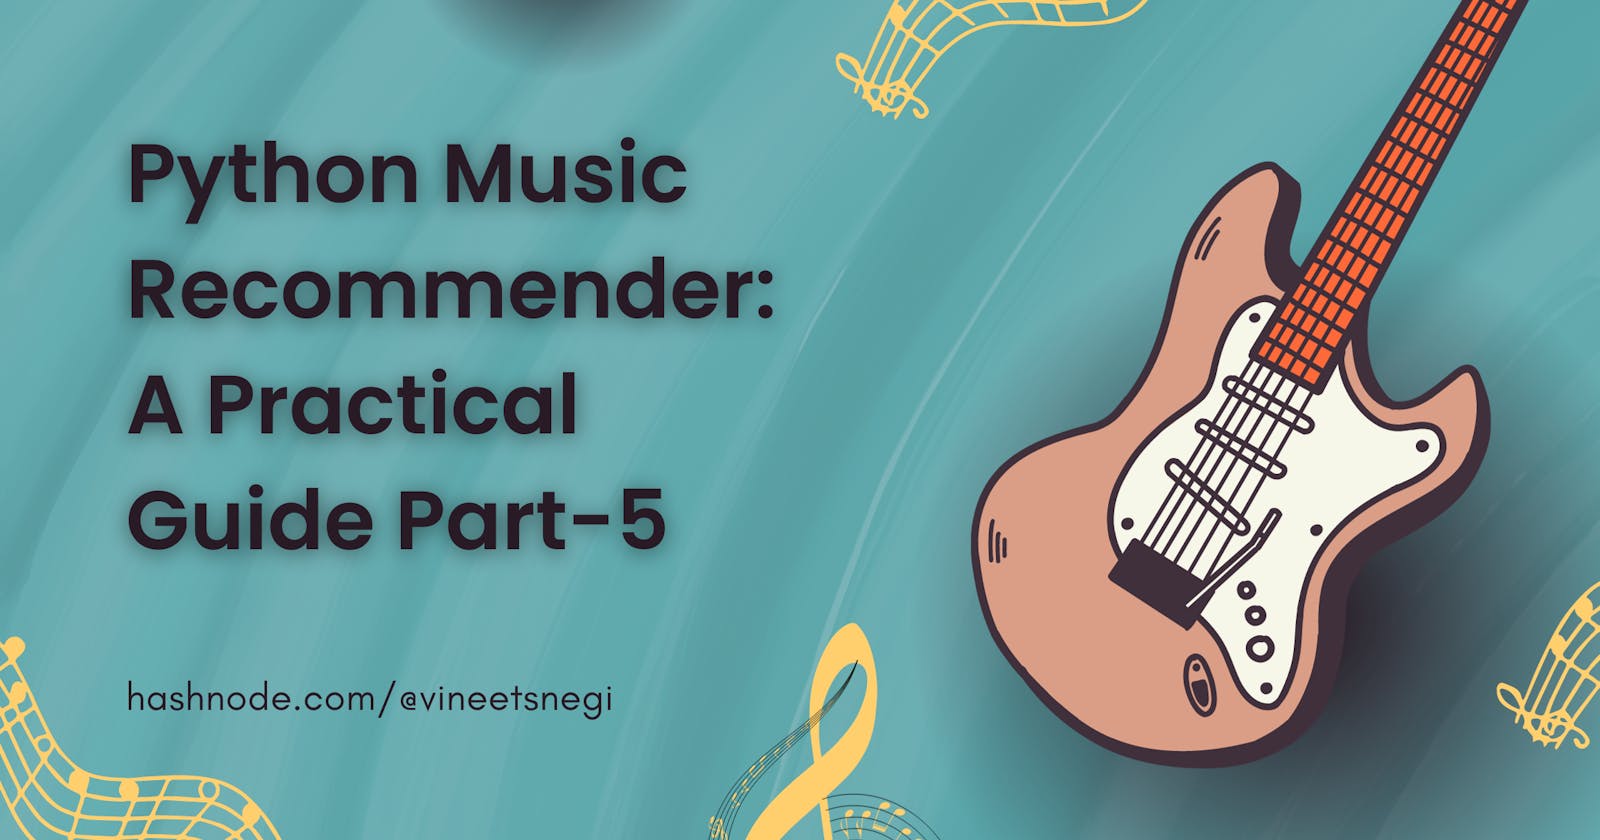 Python Music Recommender: A Practical Guide Part-5